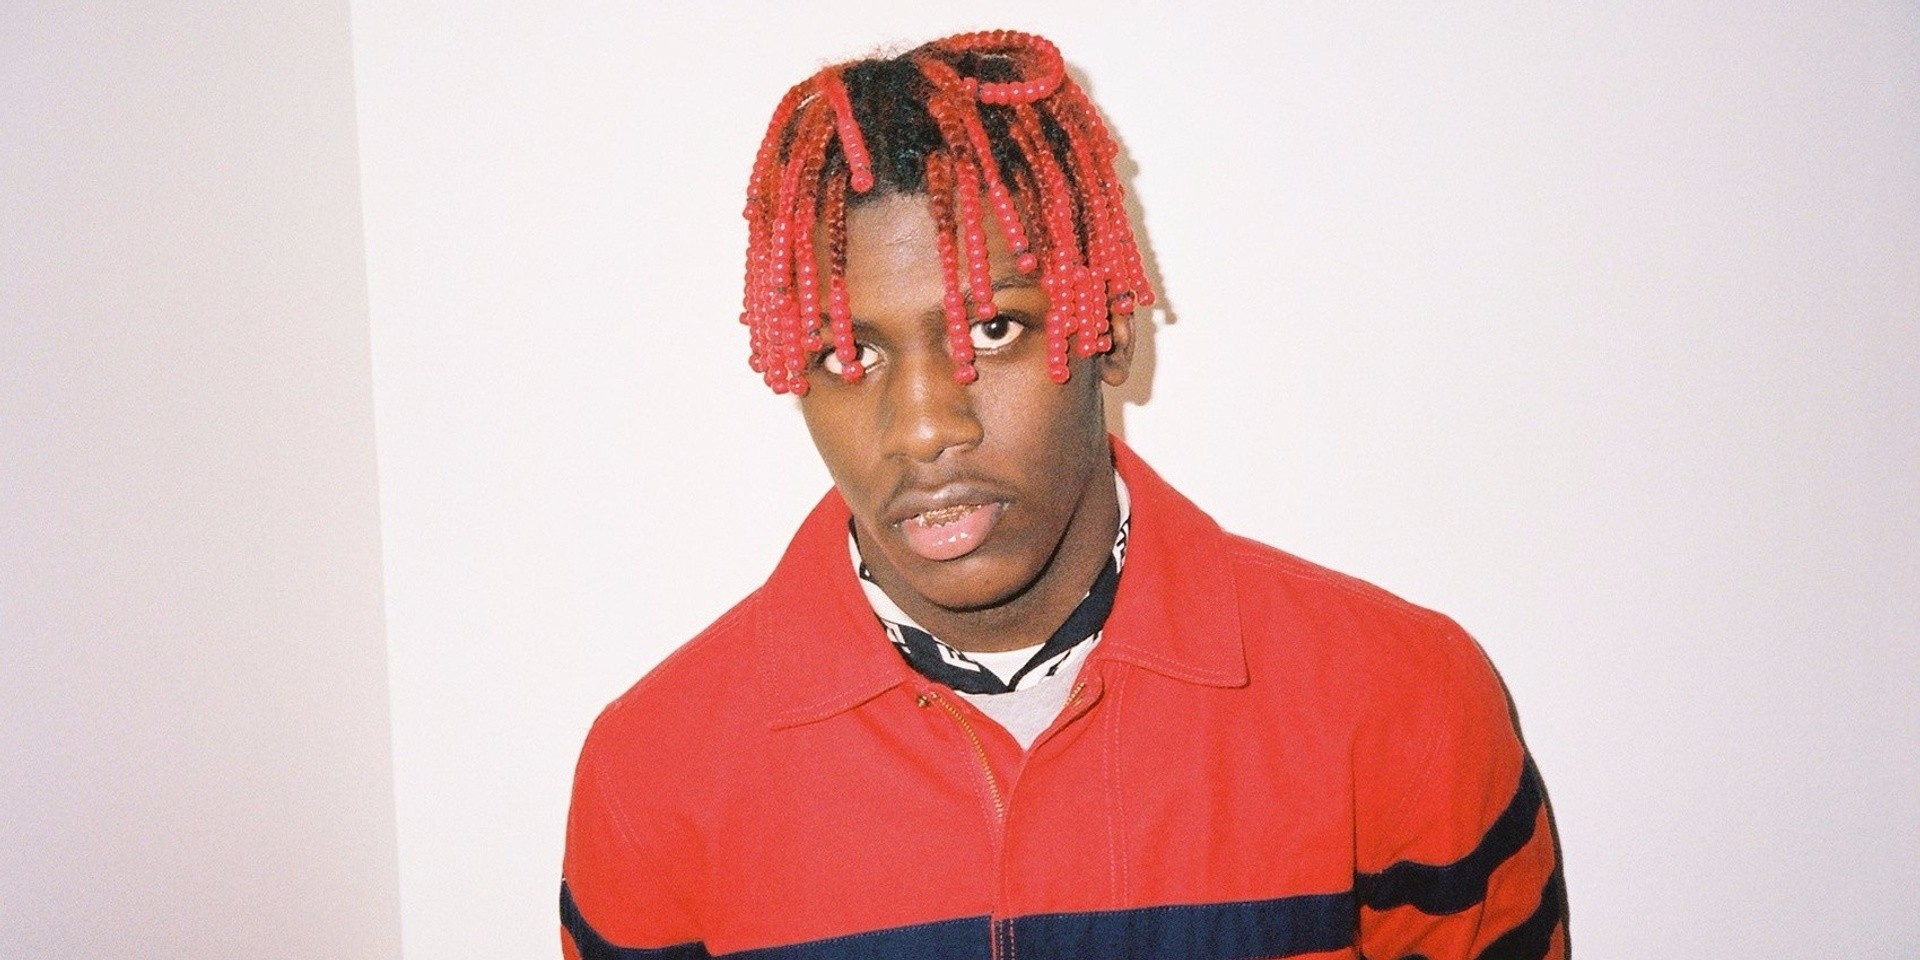 Lil Yachty declares that he "got b*tches out in Singapore" on new track 'No More' — listen